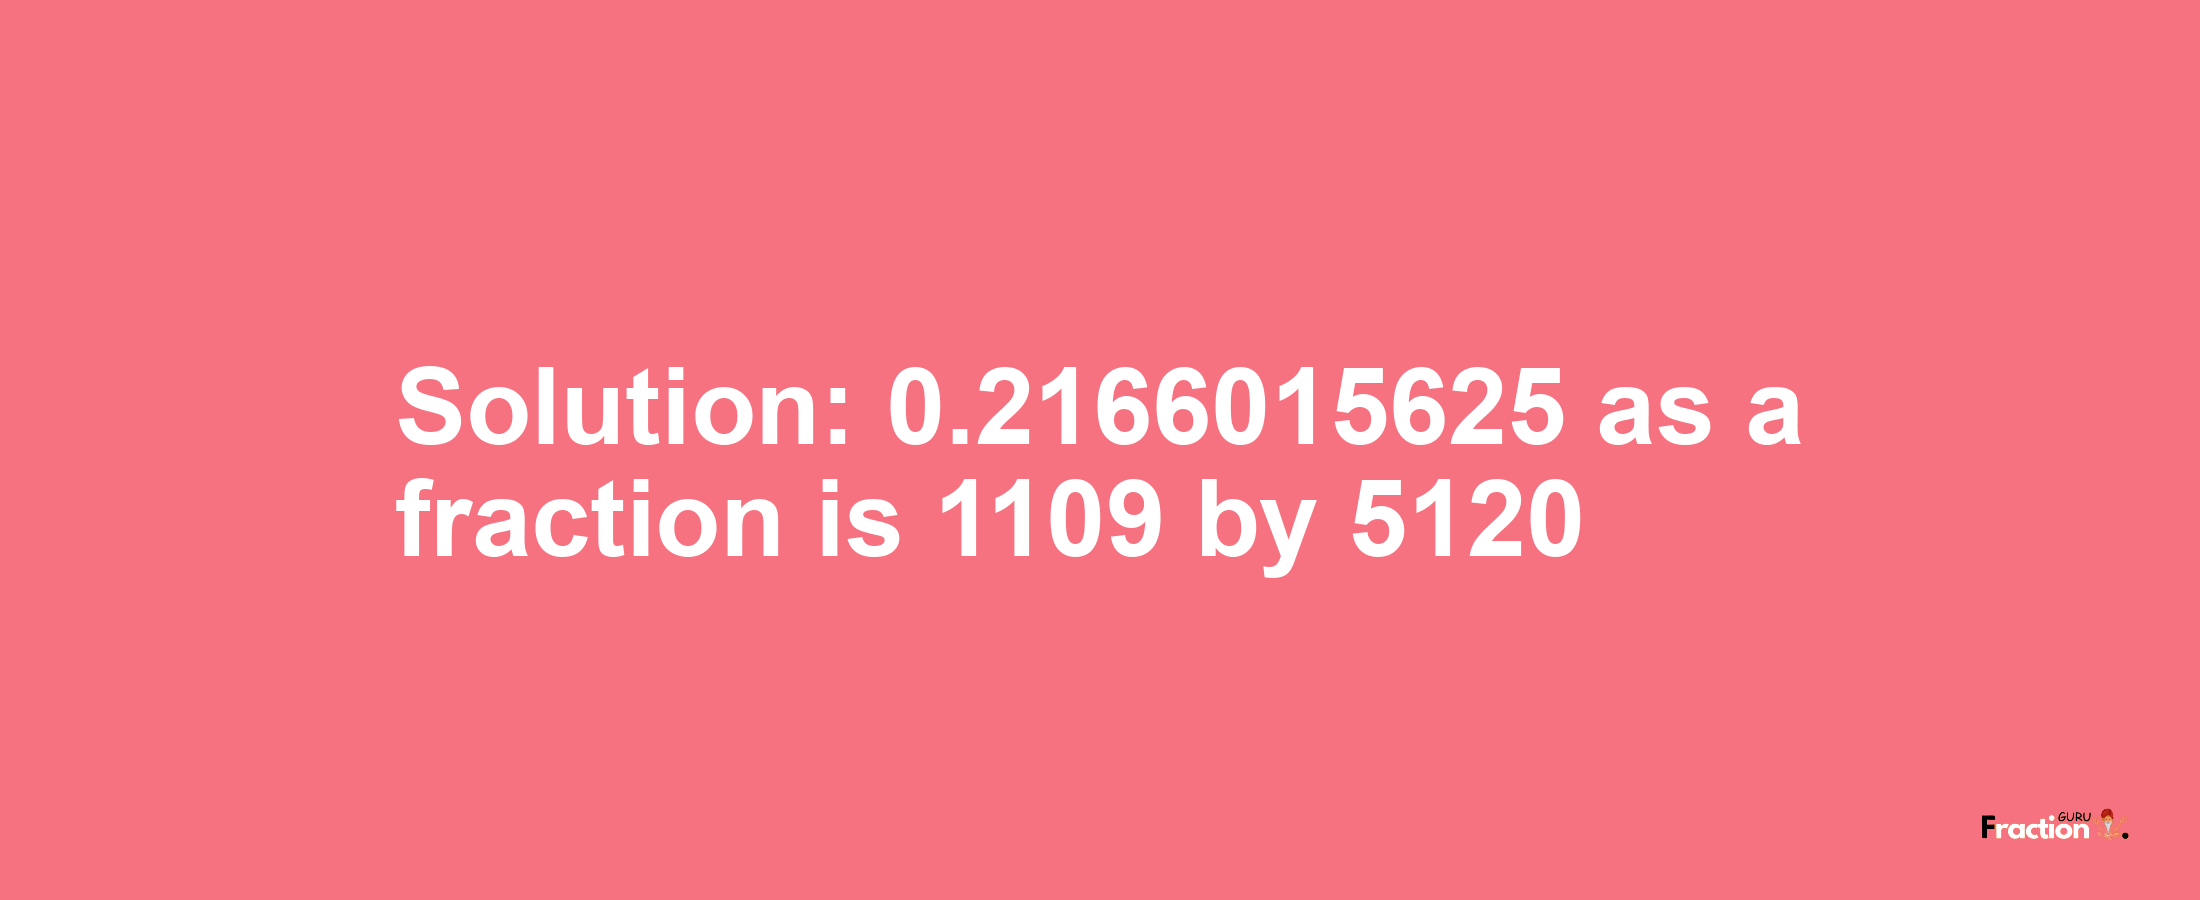 Solution:0.2166015625 as a fraction is 1109/5120